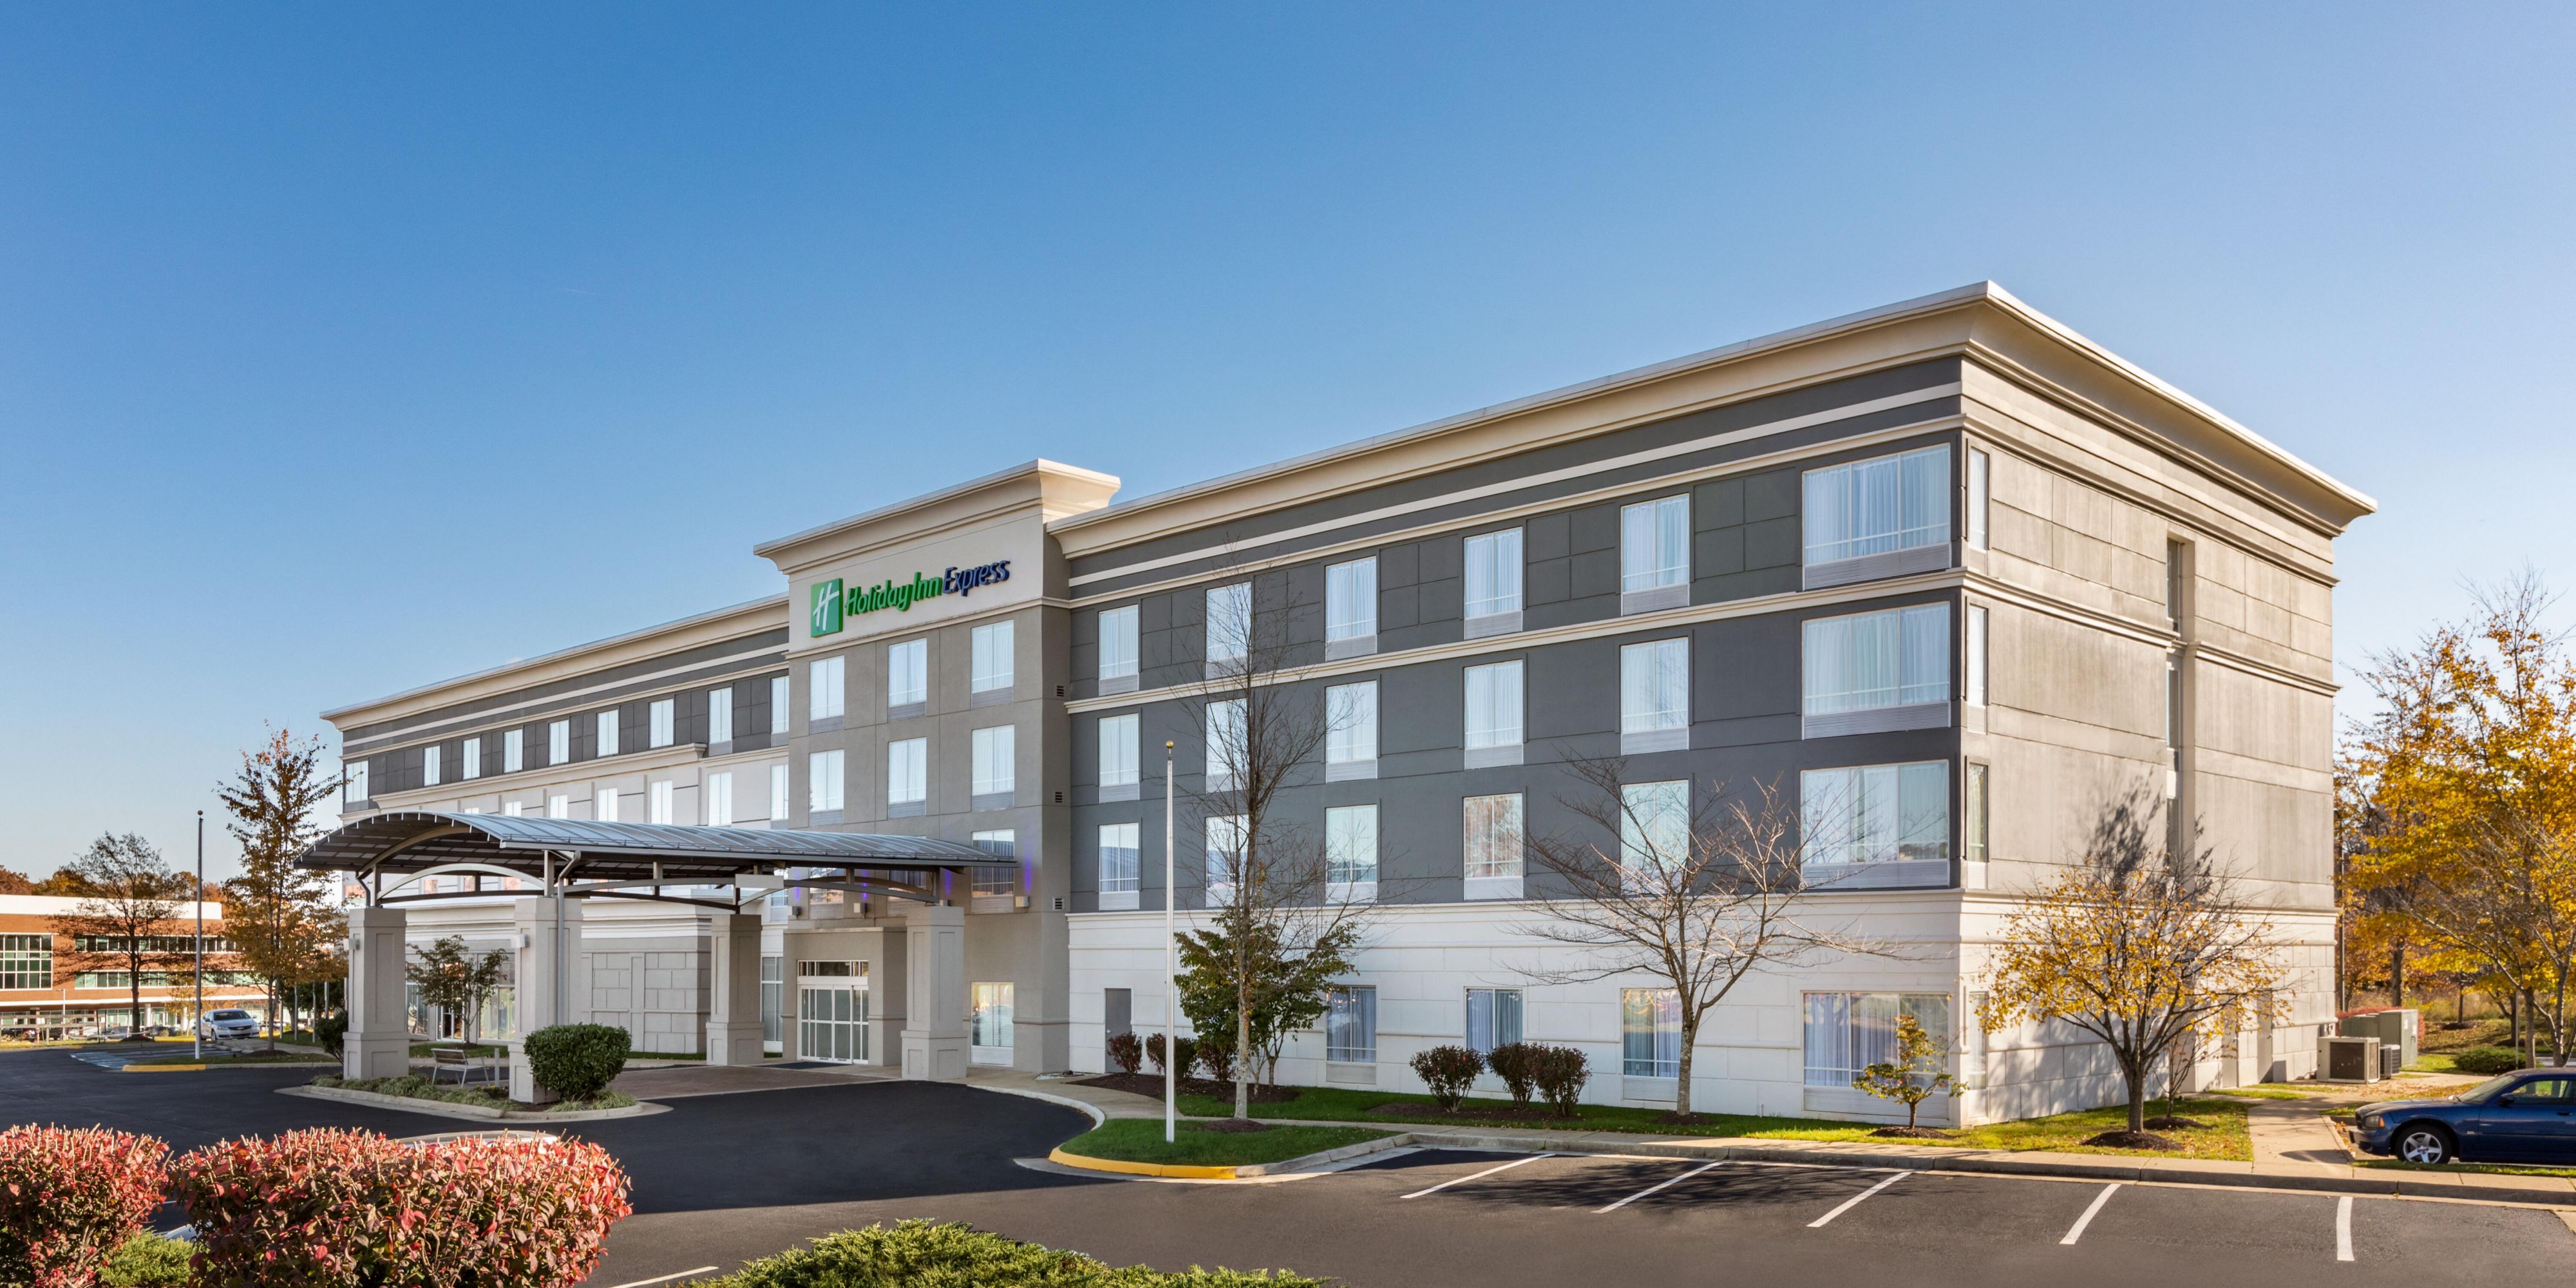 Rosie's Gaming! Located just 1 mile.  After a great time, stay with us to relax and get that good night sleep to do it all over again. We look forward to seeing you at our Newly Renovated Holiday Inn Express Dumfries-Quantico.